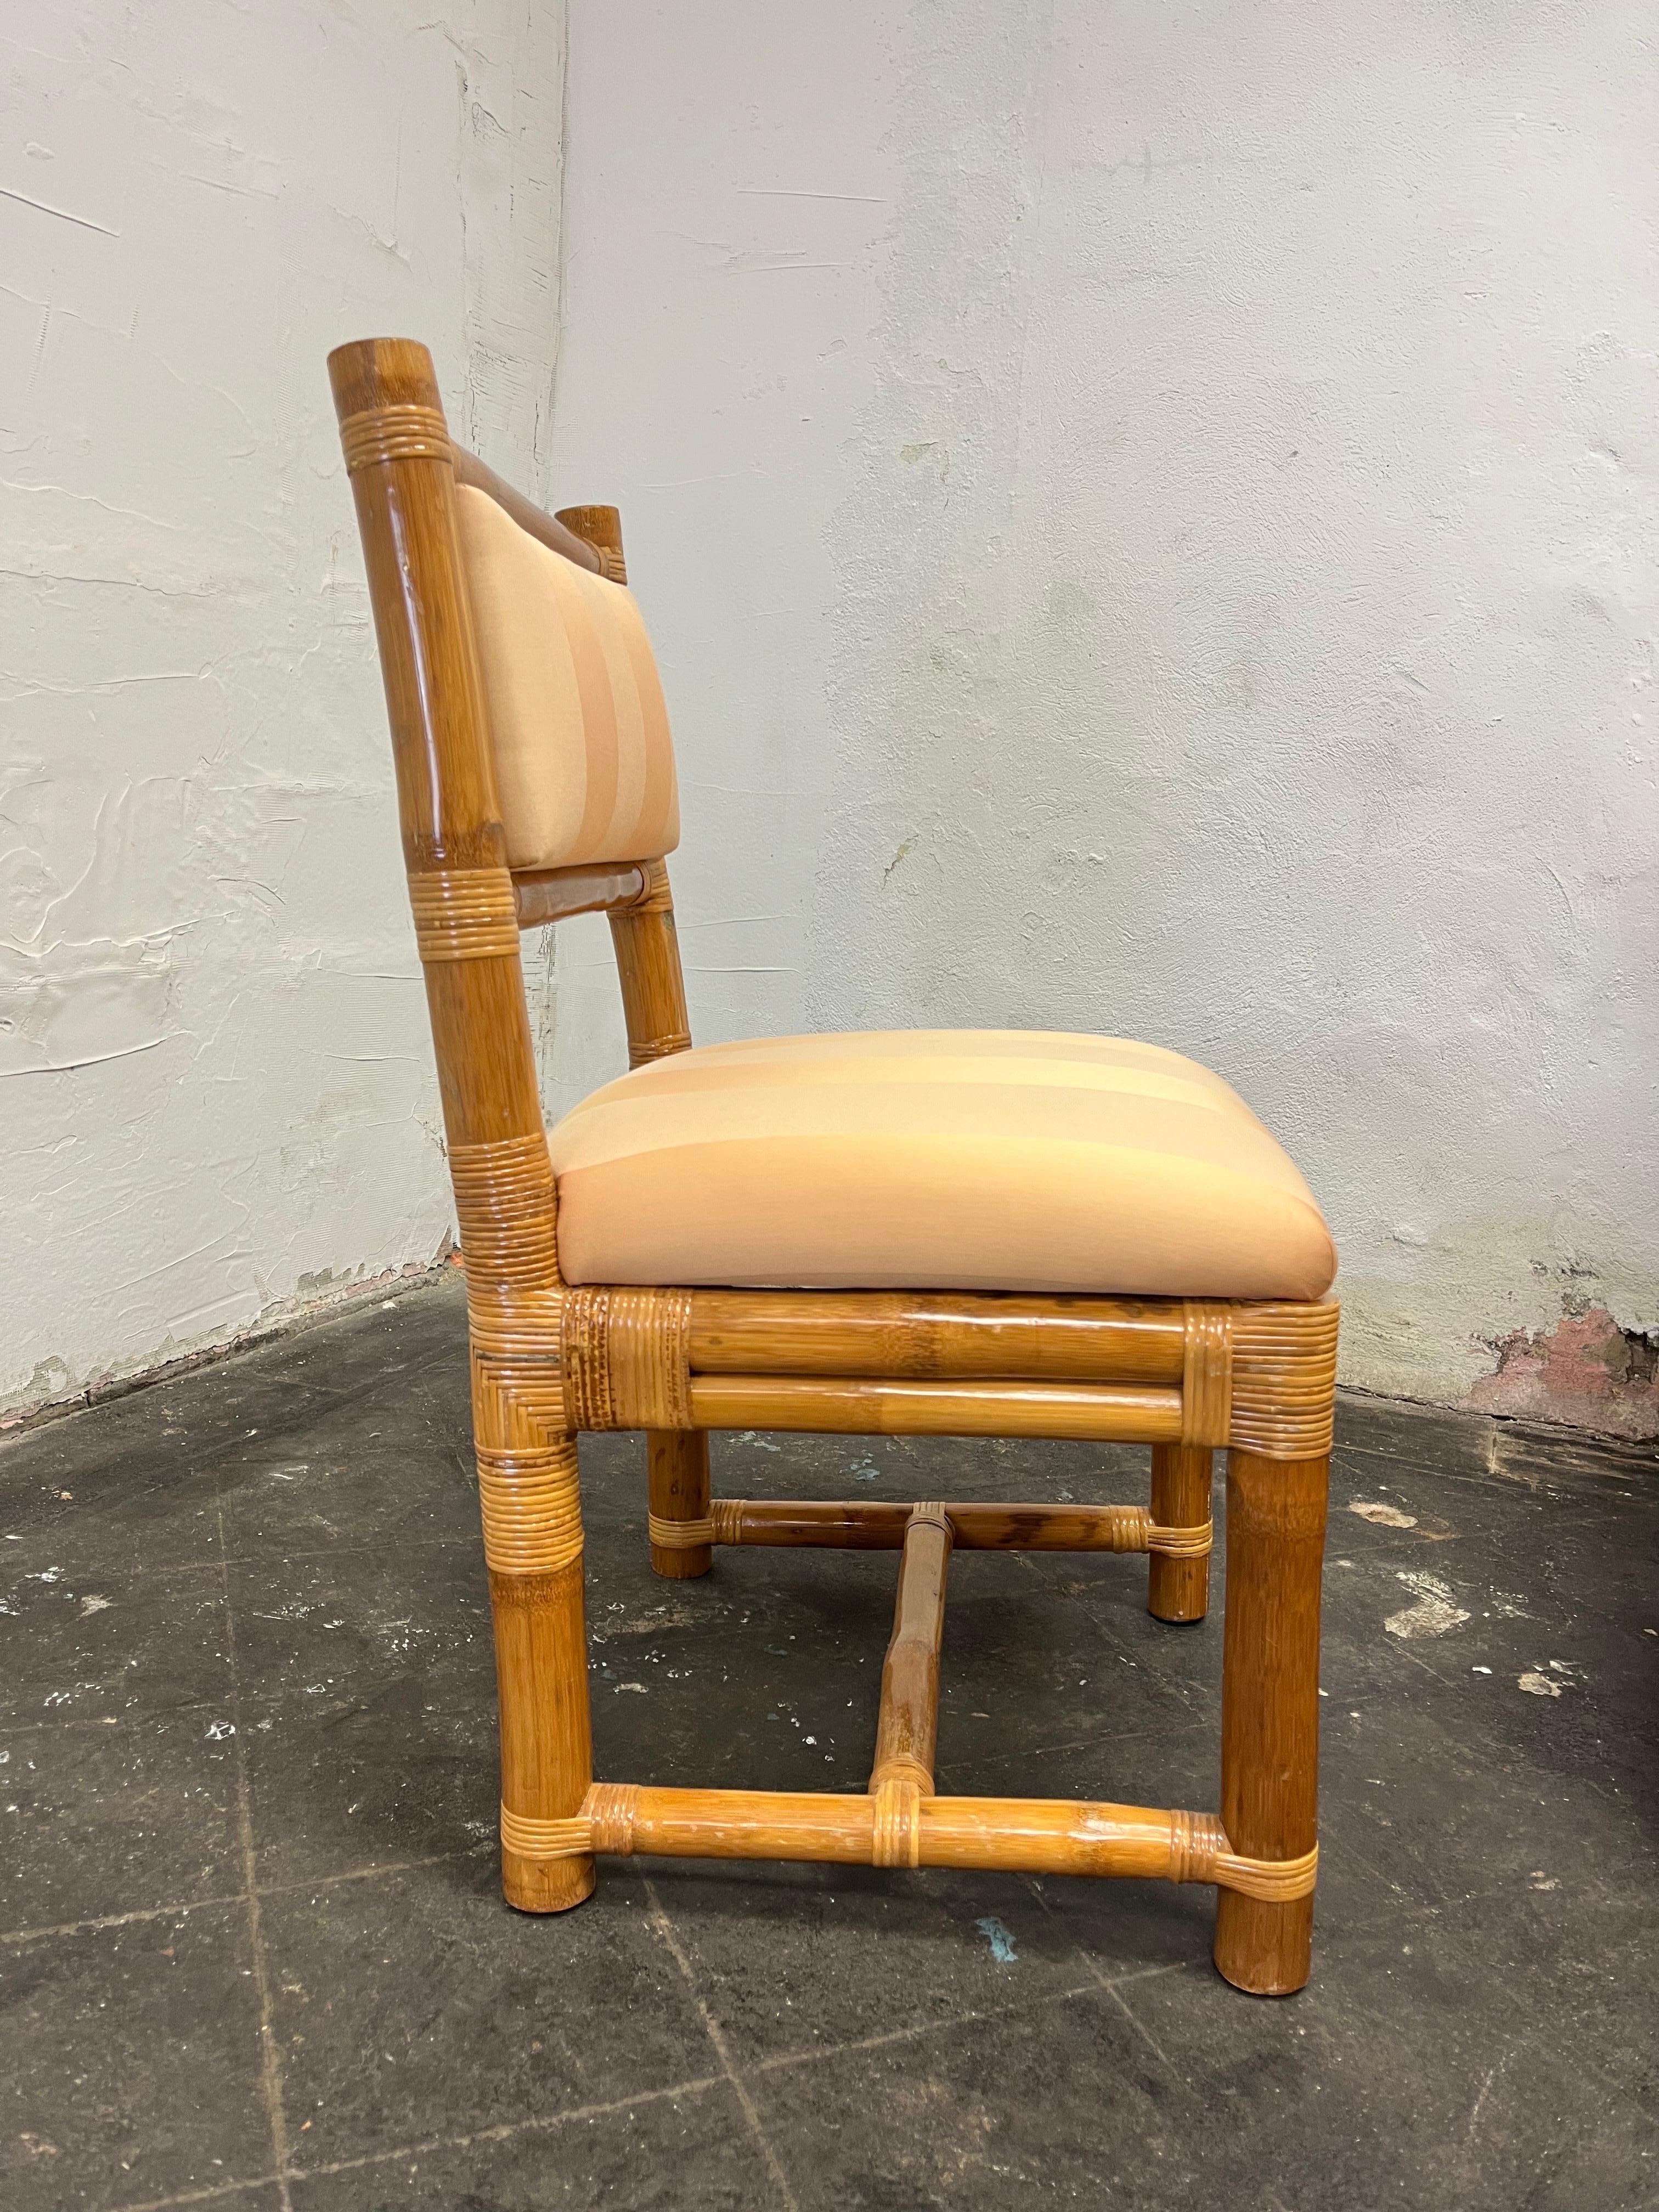 Vintage Elephant Bamboo Dining Chairs In Good Condition For Sale In W Allenhurst, NJ